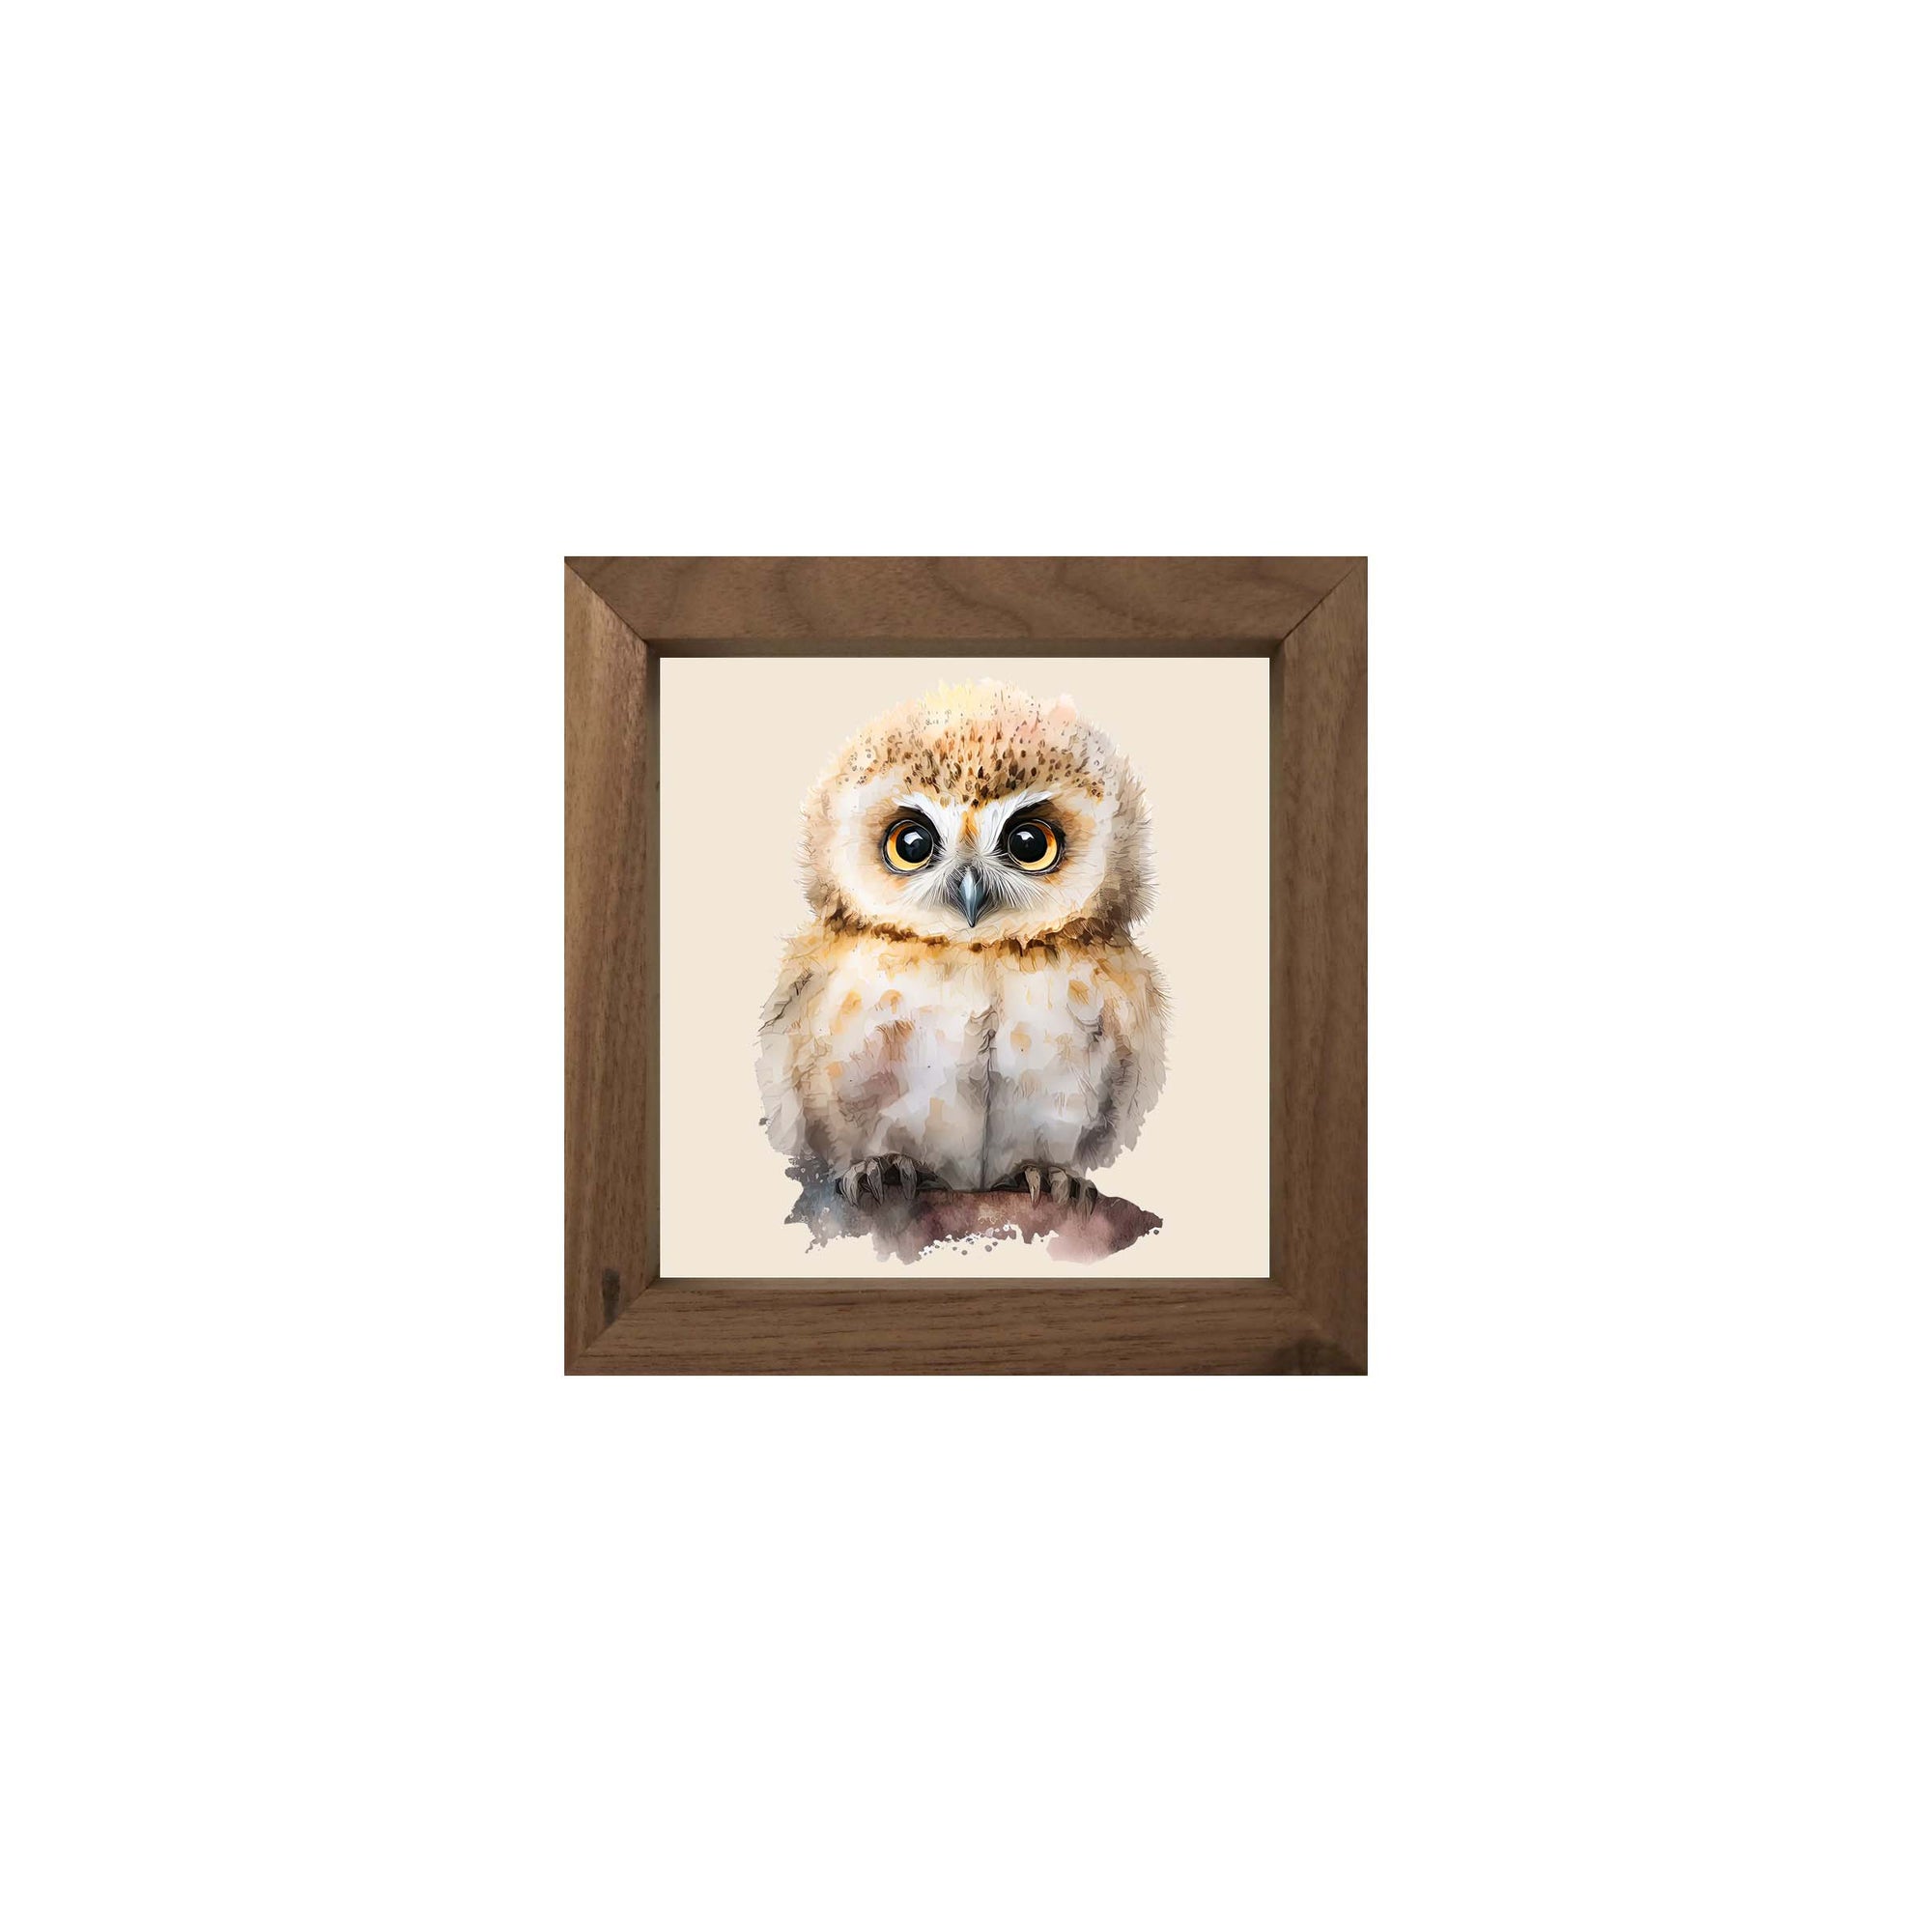 Owl Collection: 7x7 Wooden Wall Art Sign Framed Shadow Box| Baby Owl2